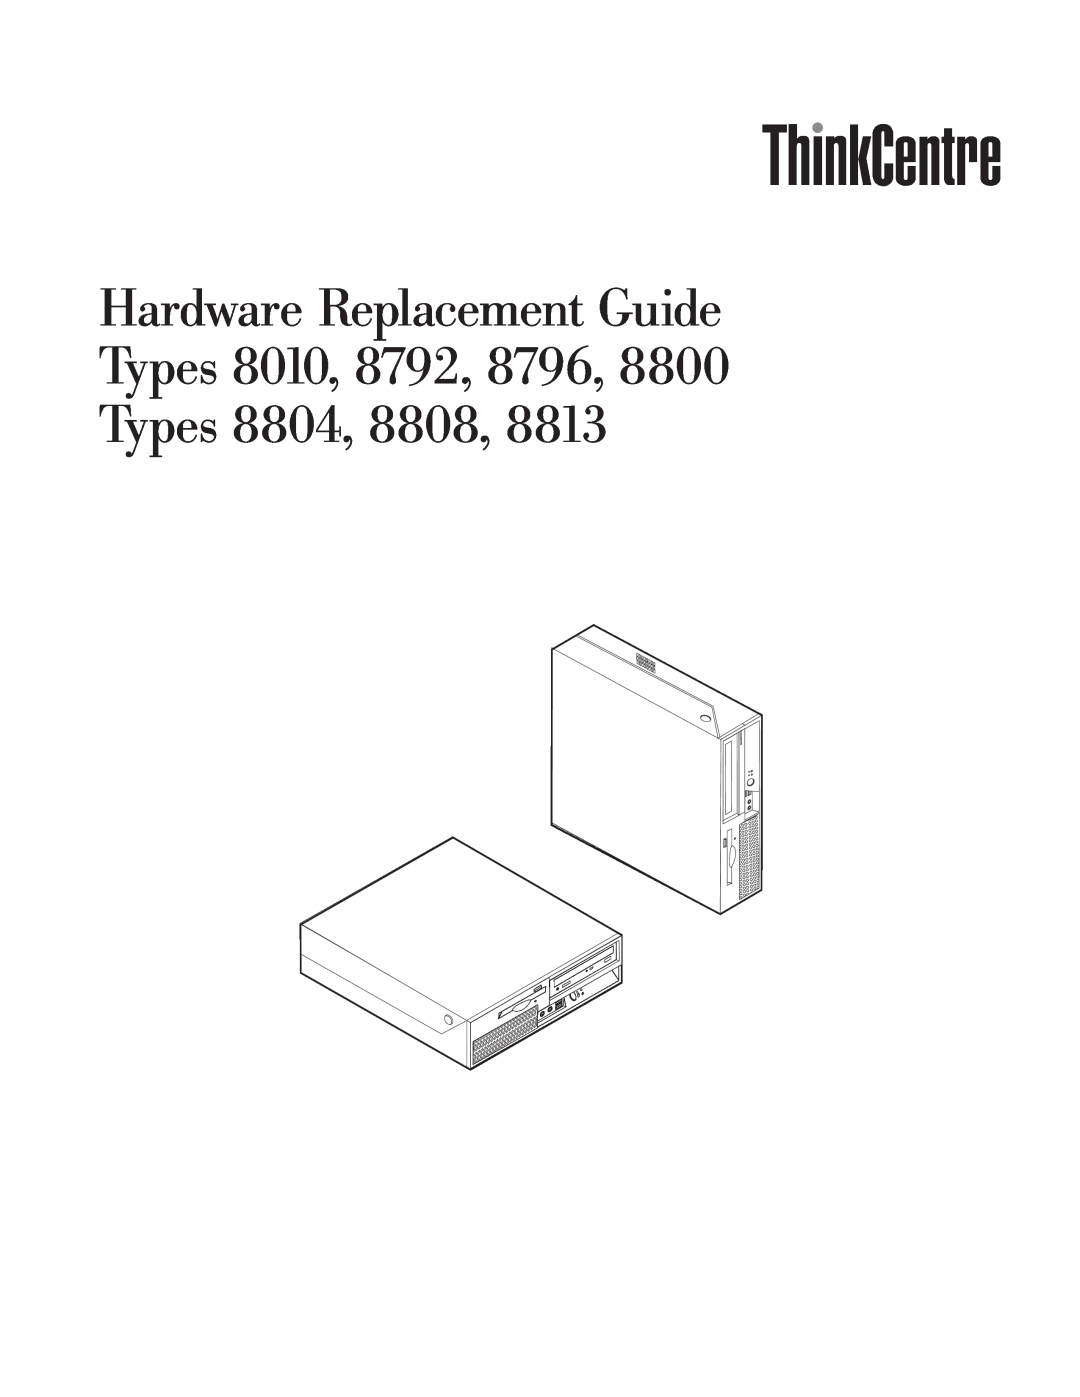 Lenovo 8813, 8800 manual Hardware Replacement Guide, Types 8010, 8792, 8796, Types 8804, 8808 